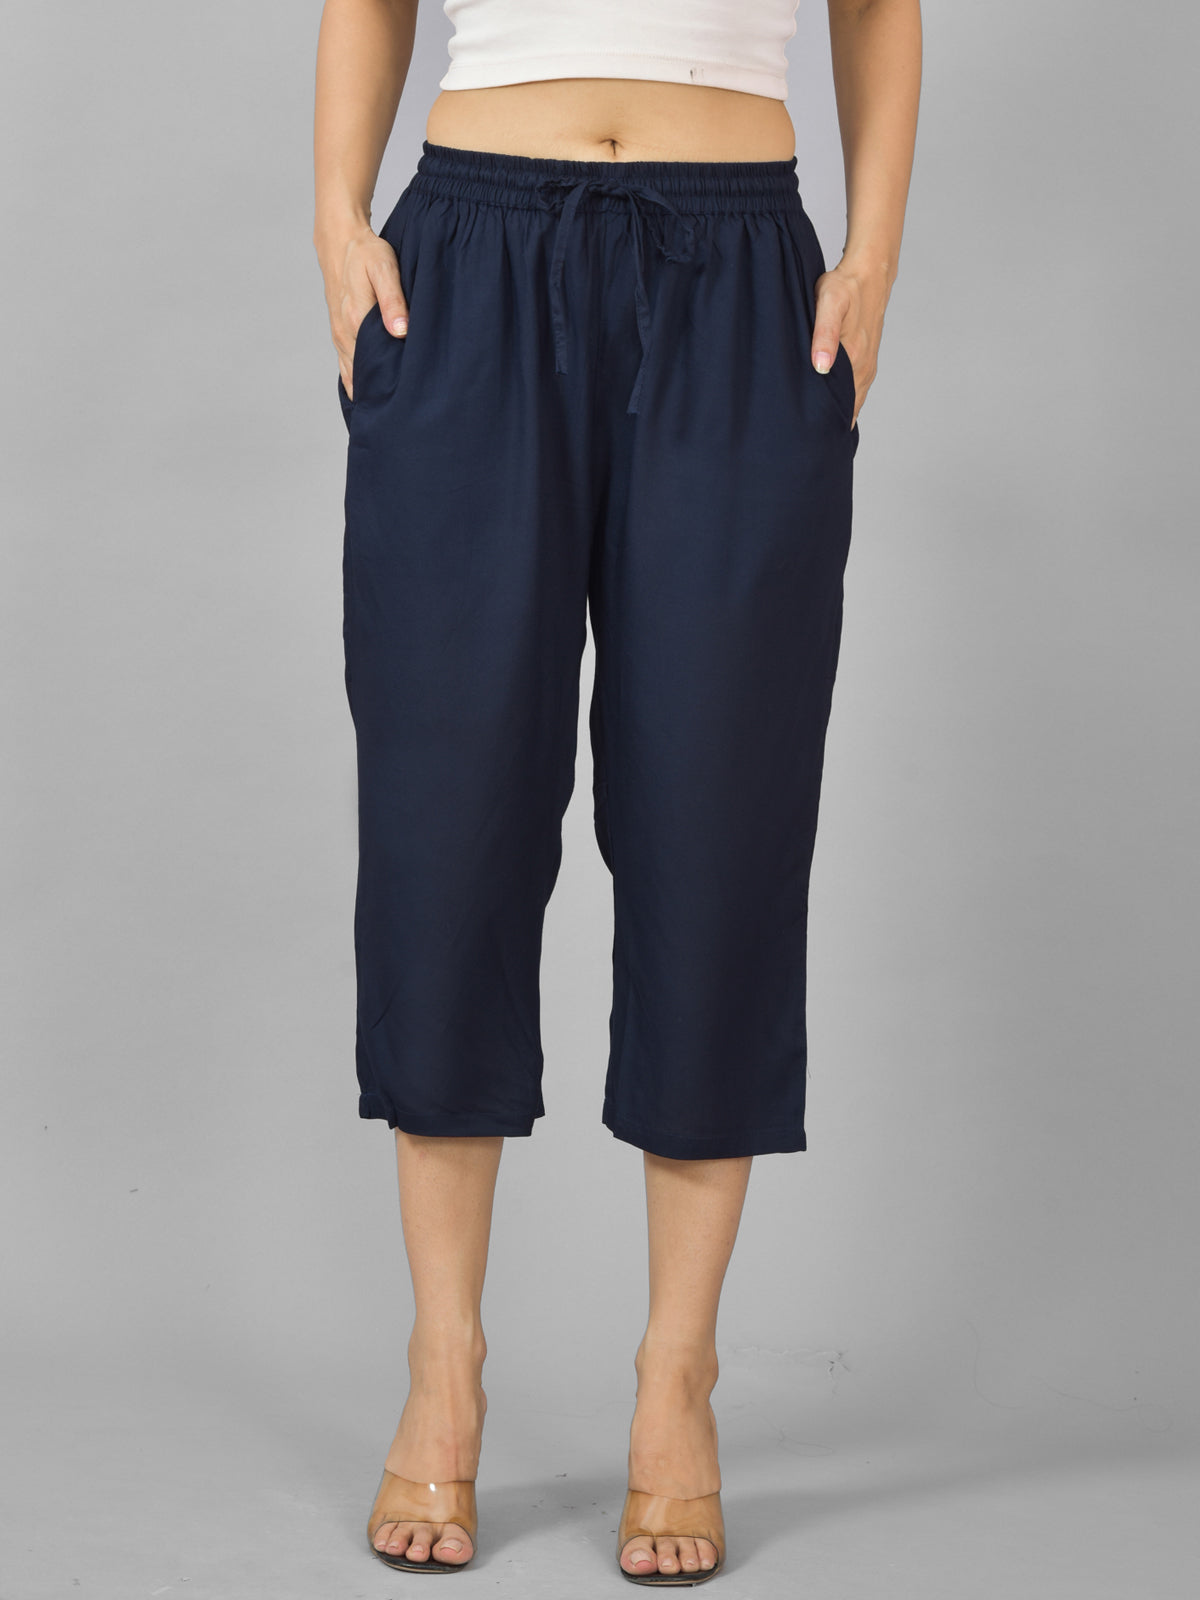 Pack Of 2 Womens Dark Grey And Navy Blue Calf Length Rayon Culottes Trouser Combo